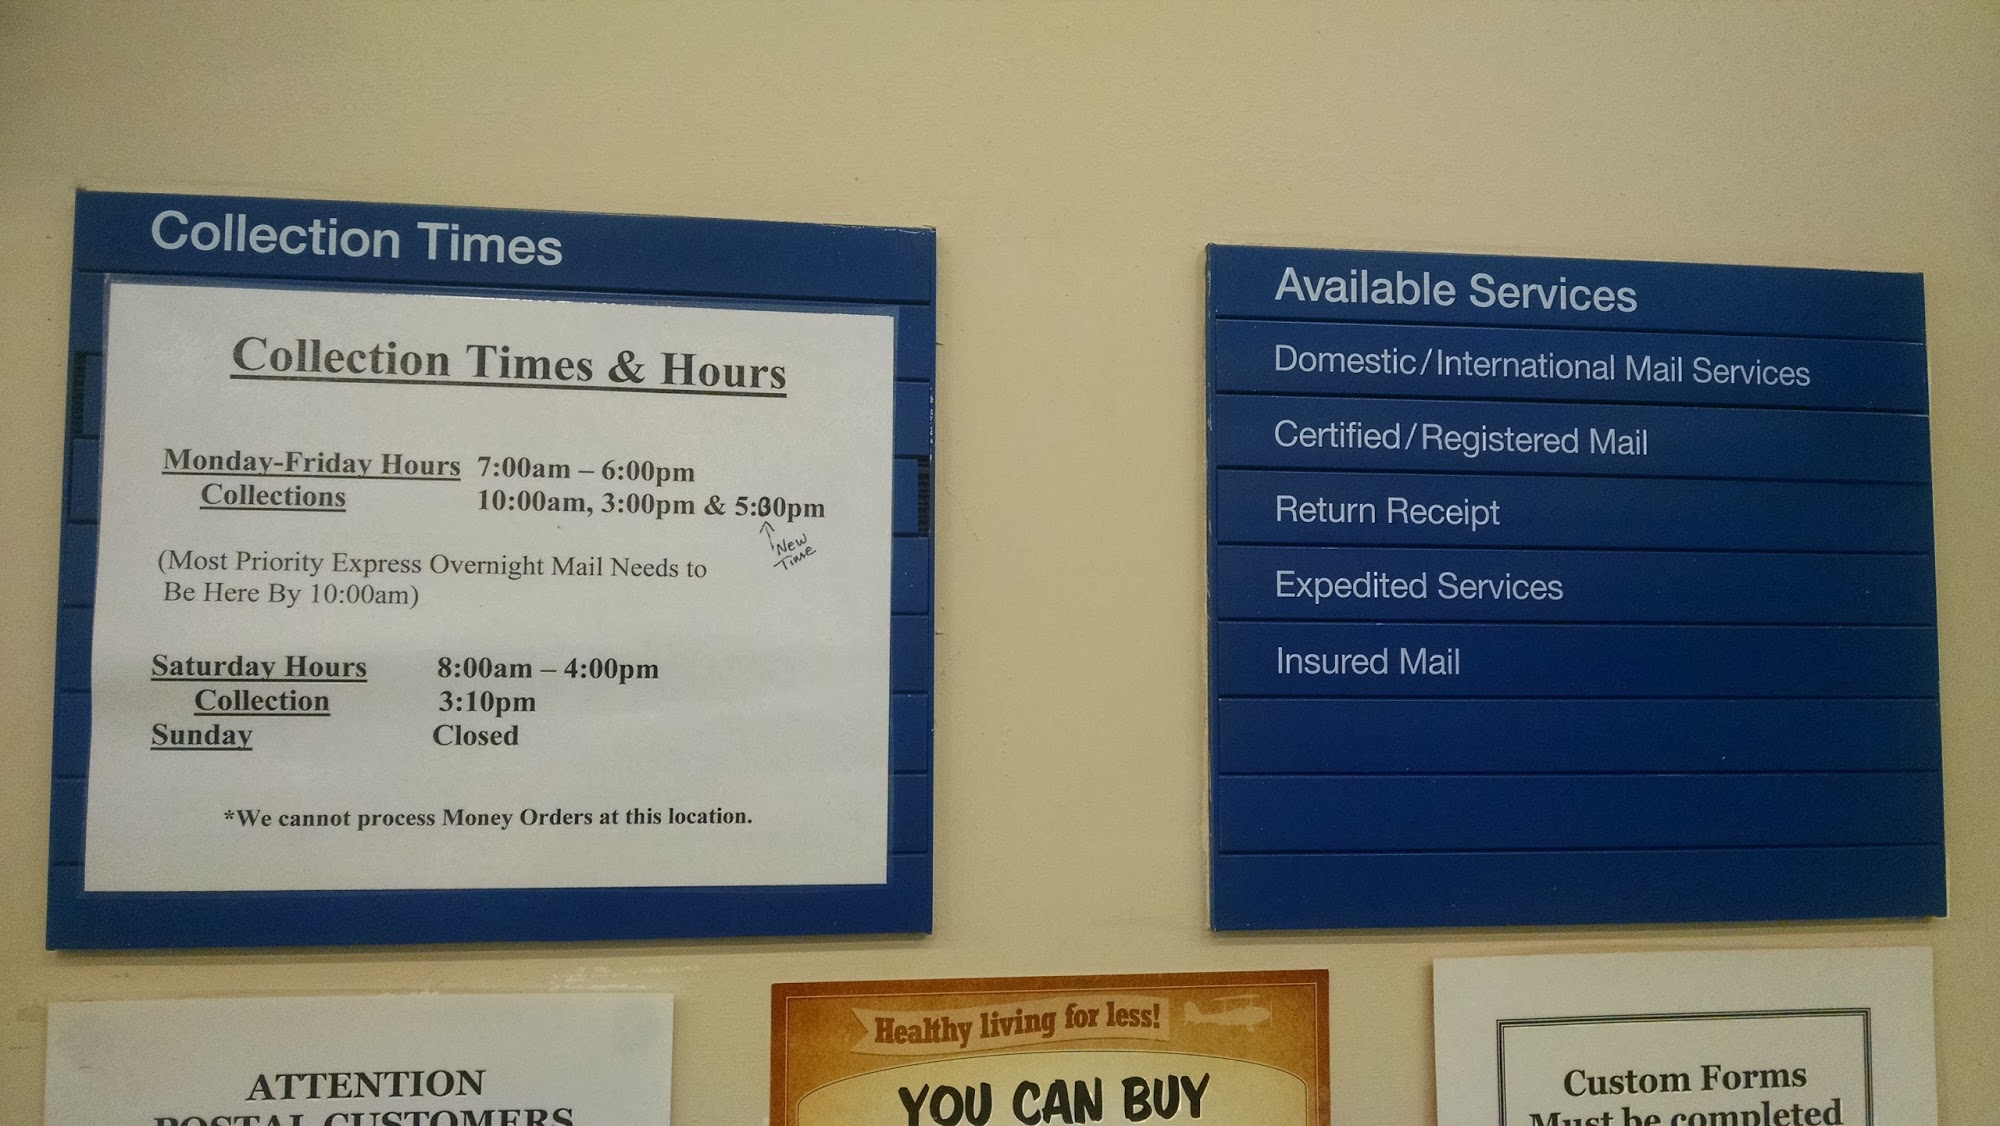 USPS Shipping Center (Inside Sprouts Farmers Market)